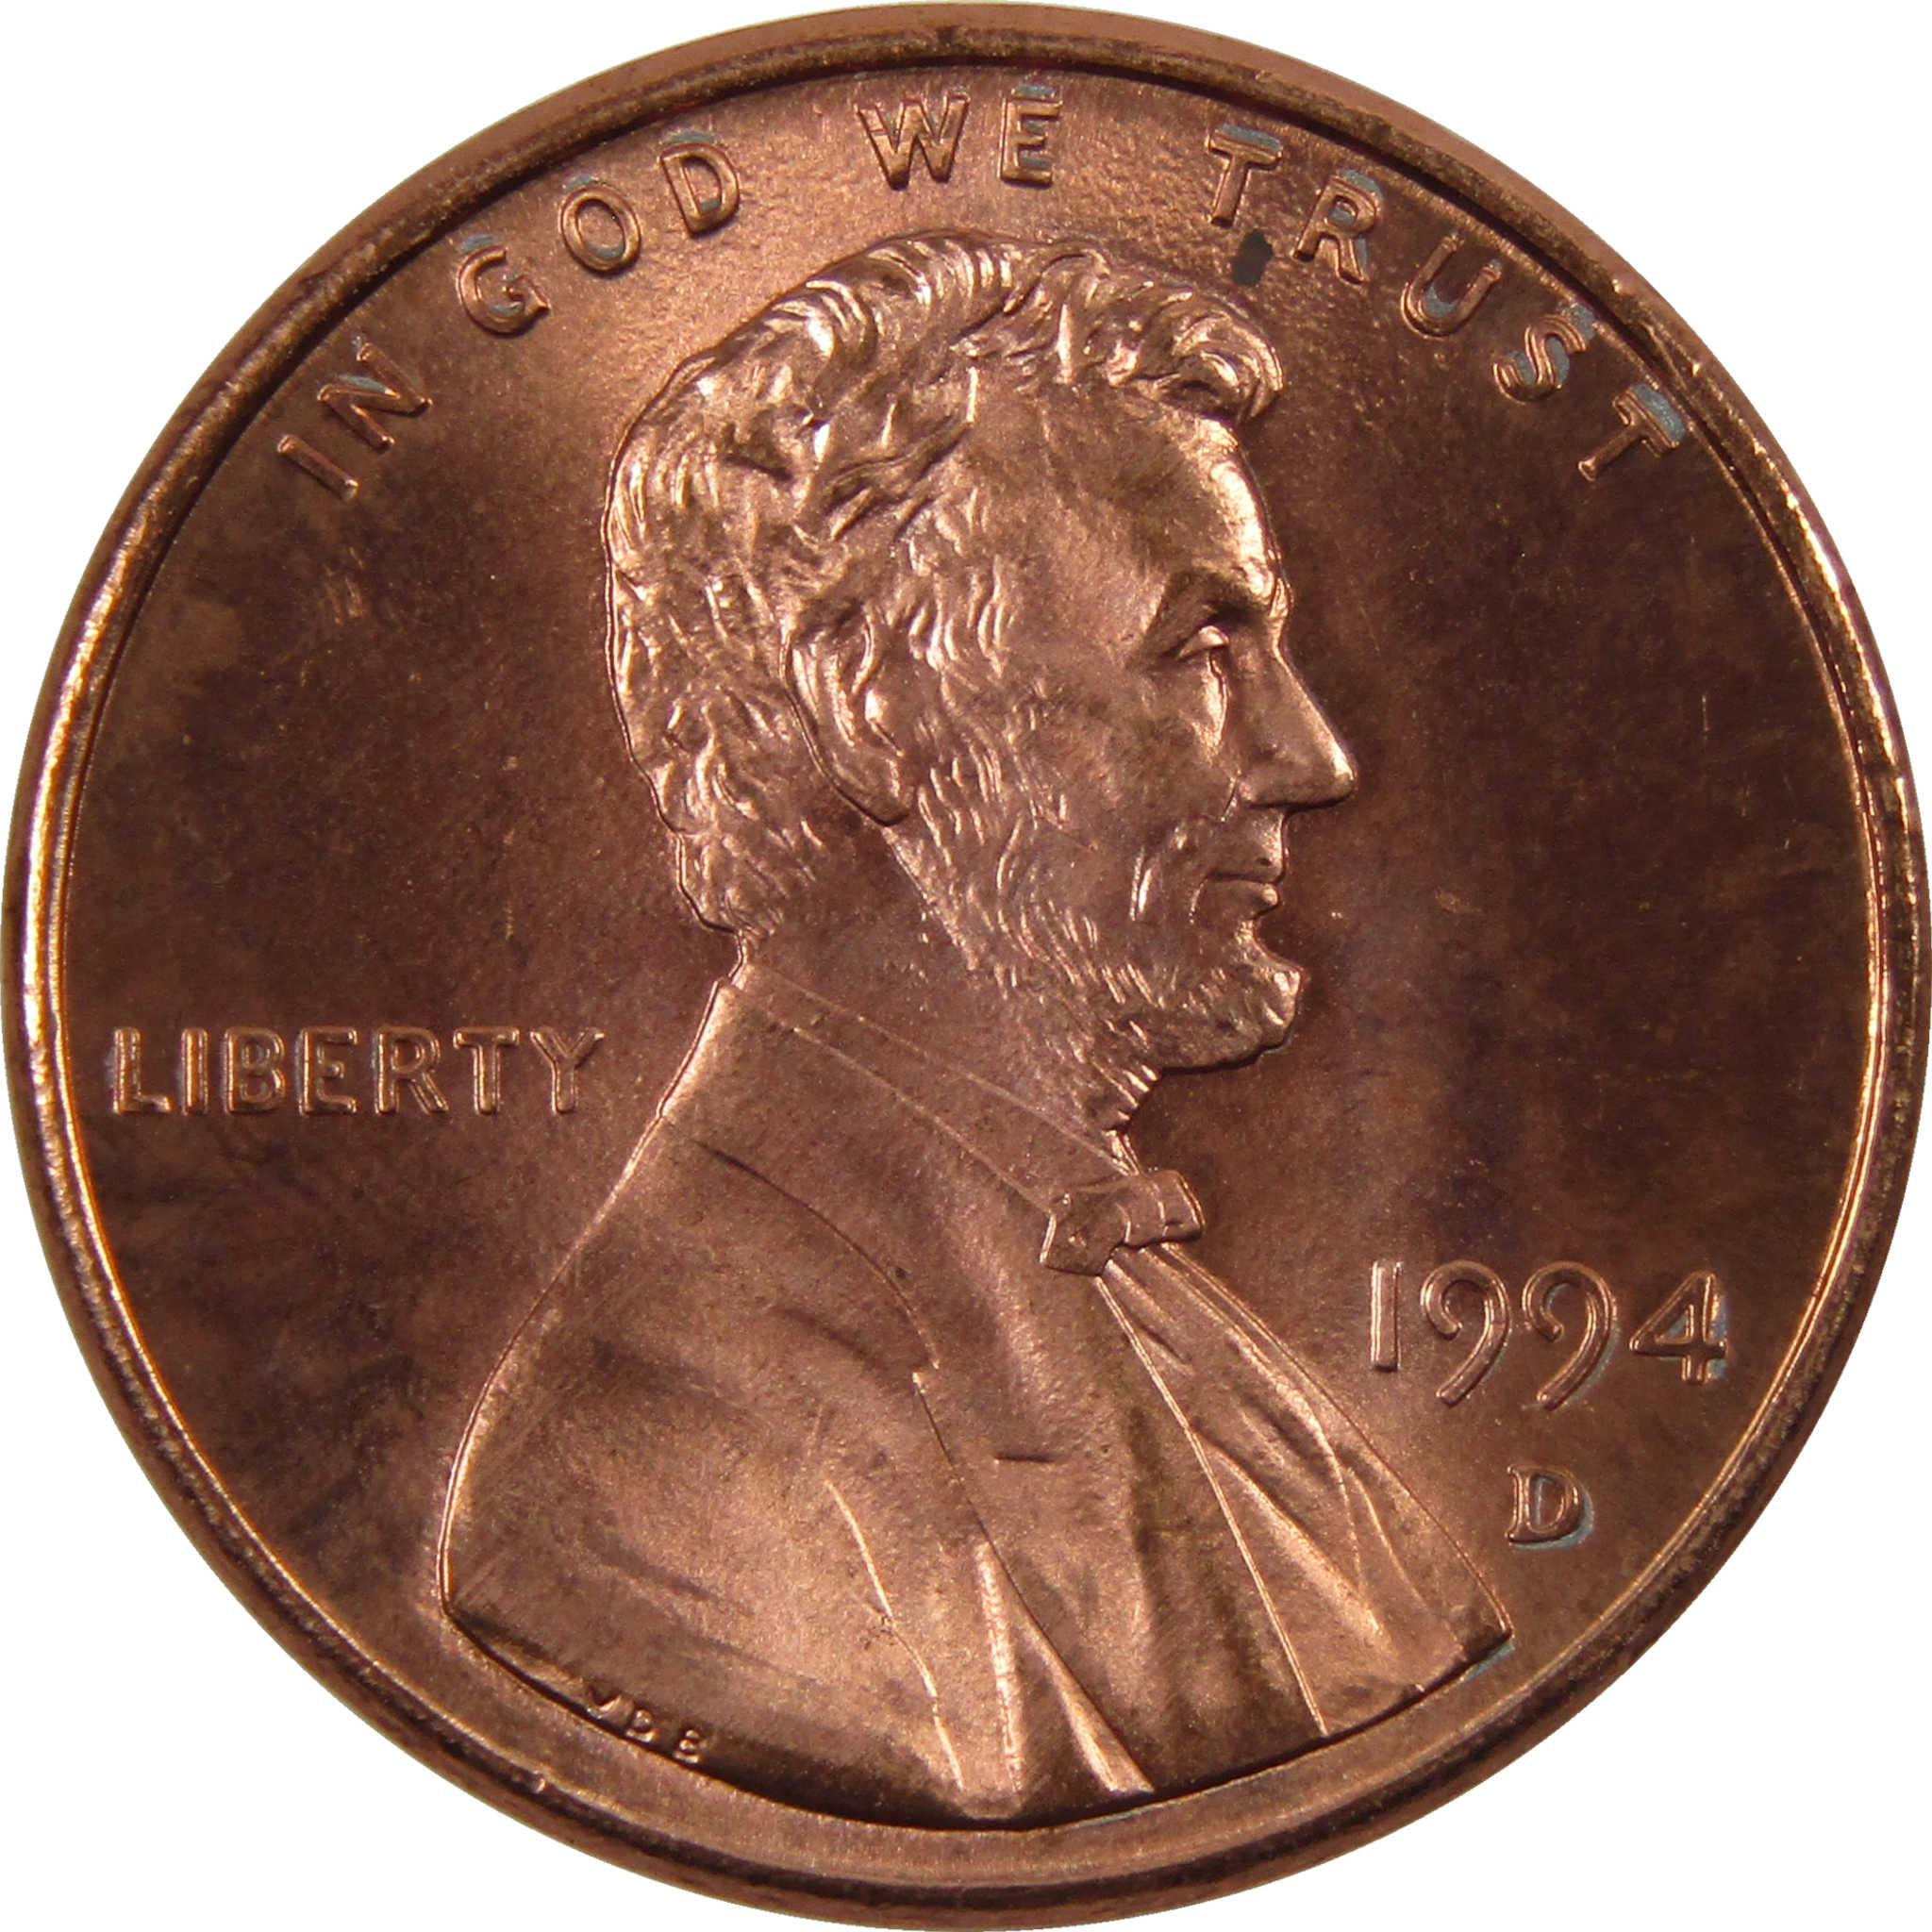 1994 D Lincoln Memorial Cent BU Uncirculated Penny 1c Coin